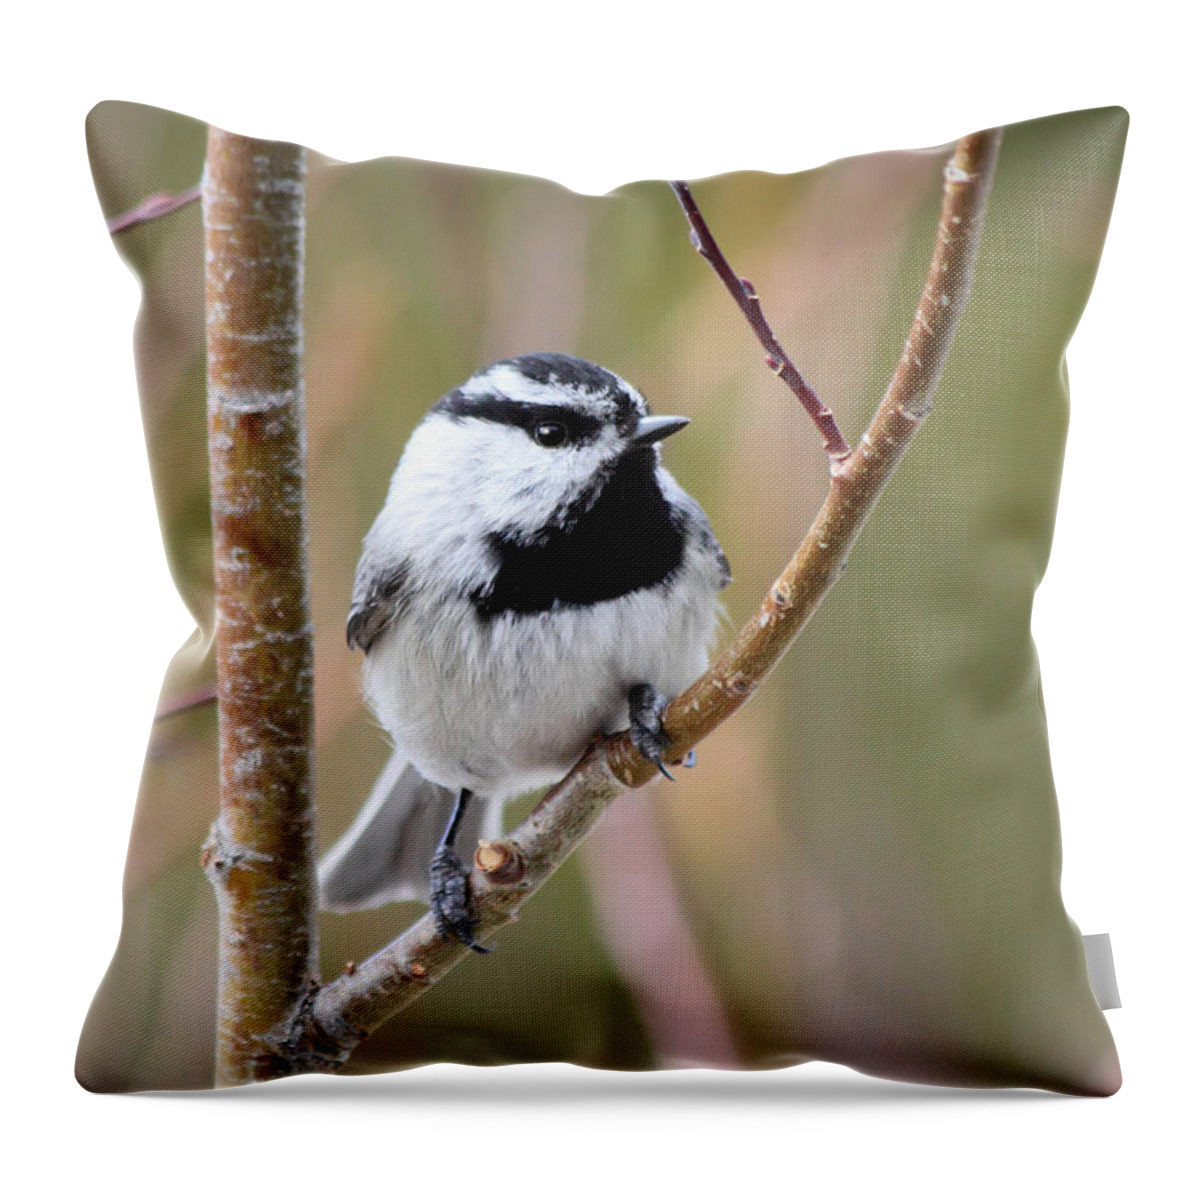 Chickadee Throw Pillow featuring the photograph Mountain Chickadee by Shane Bechler